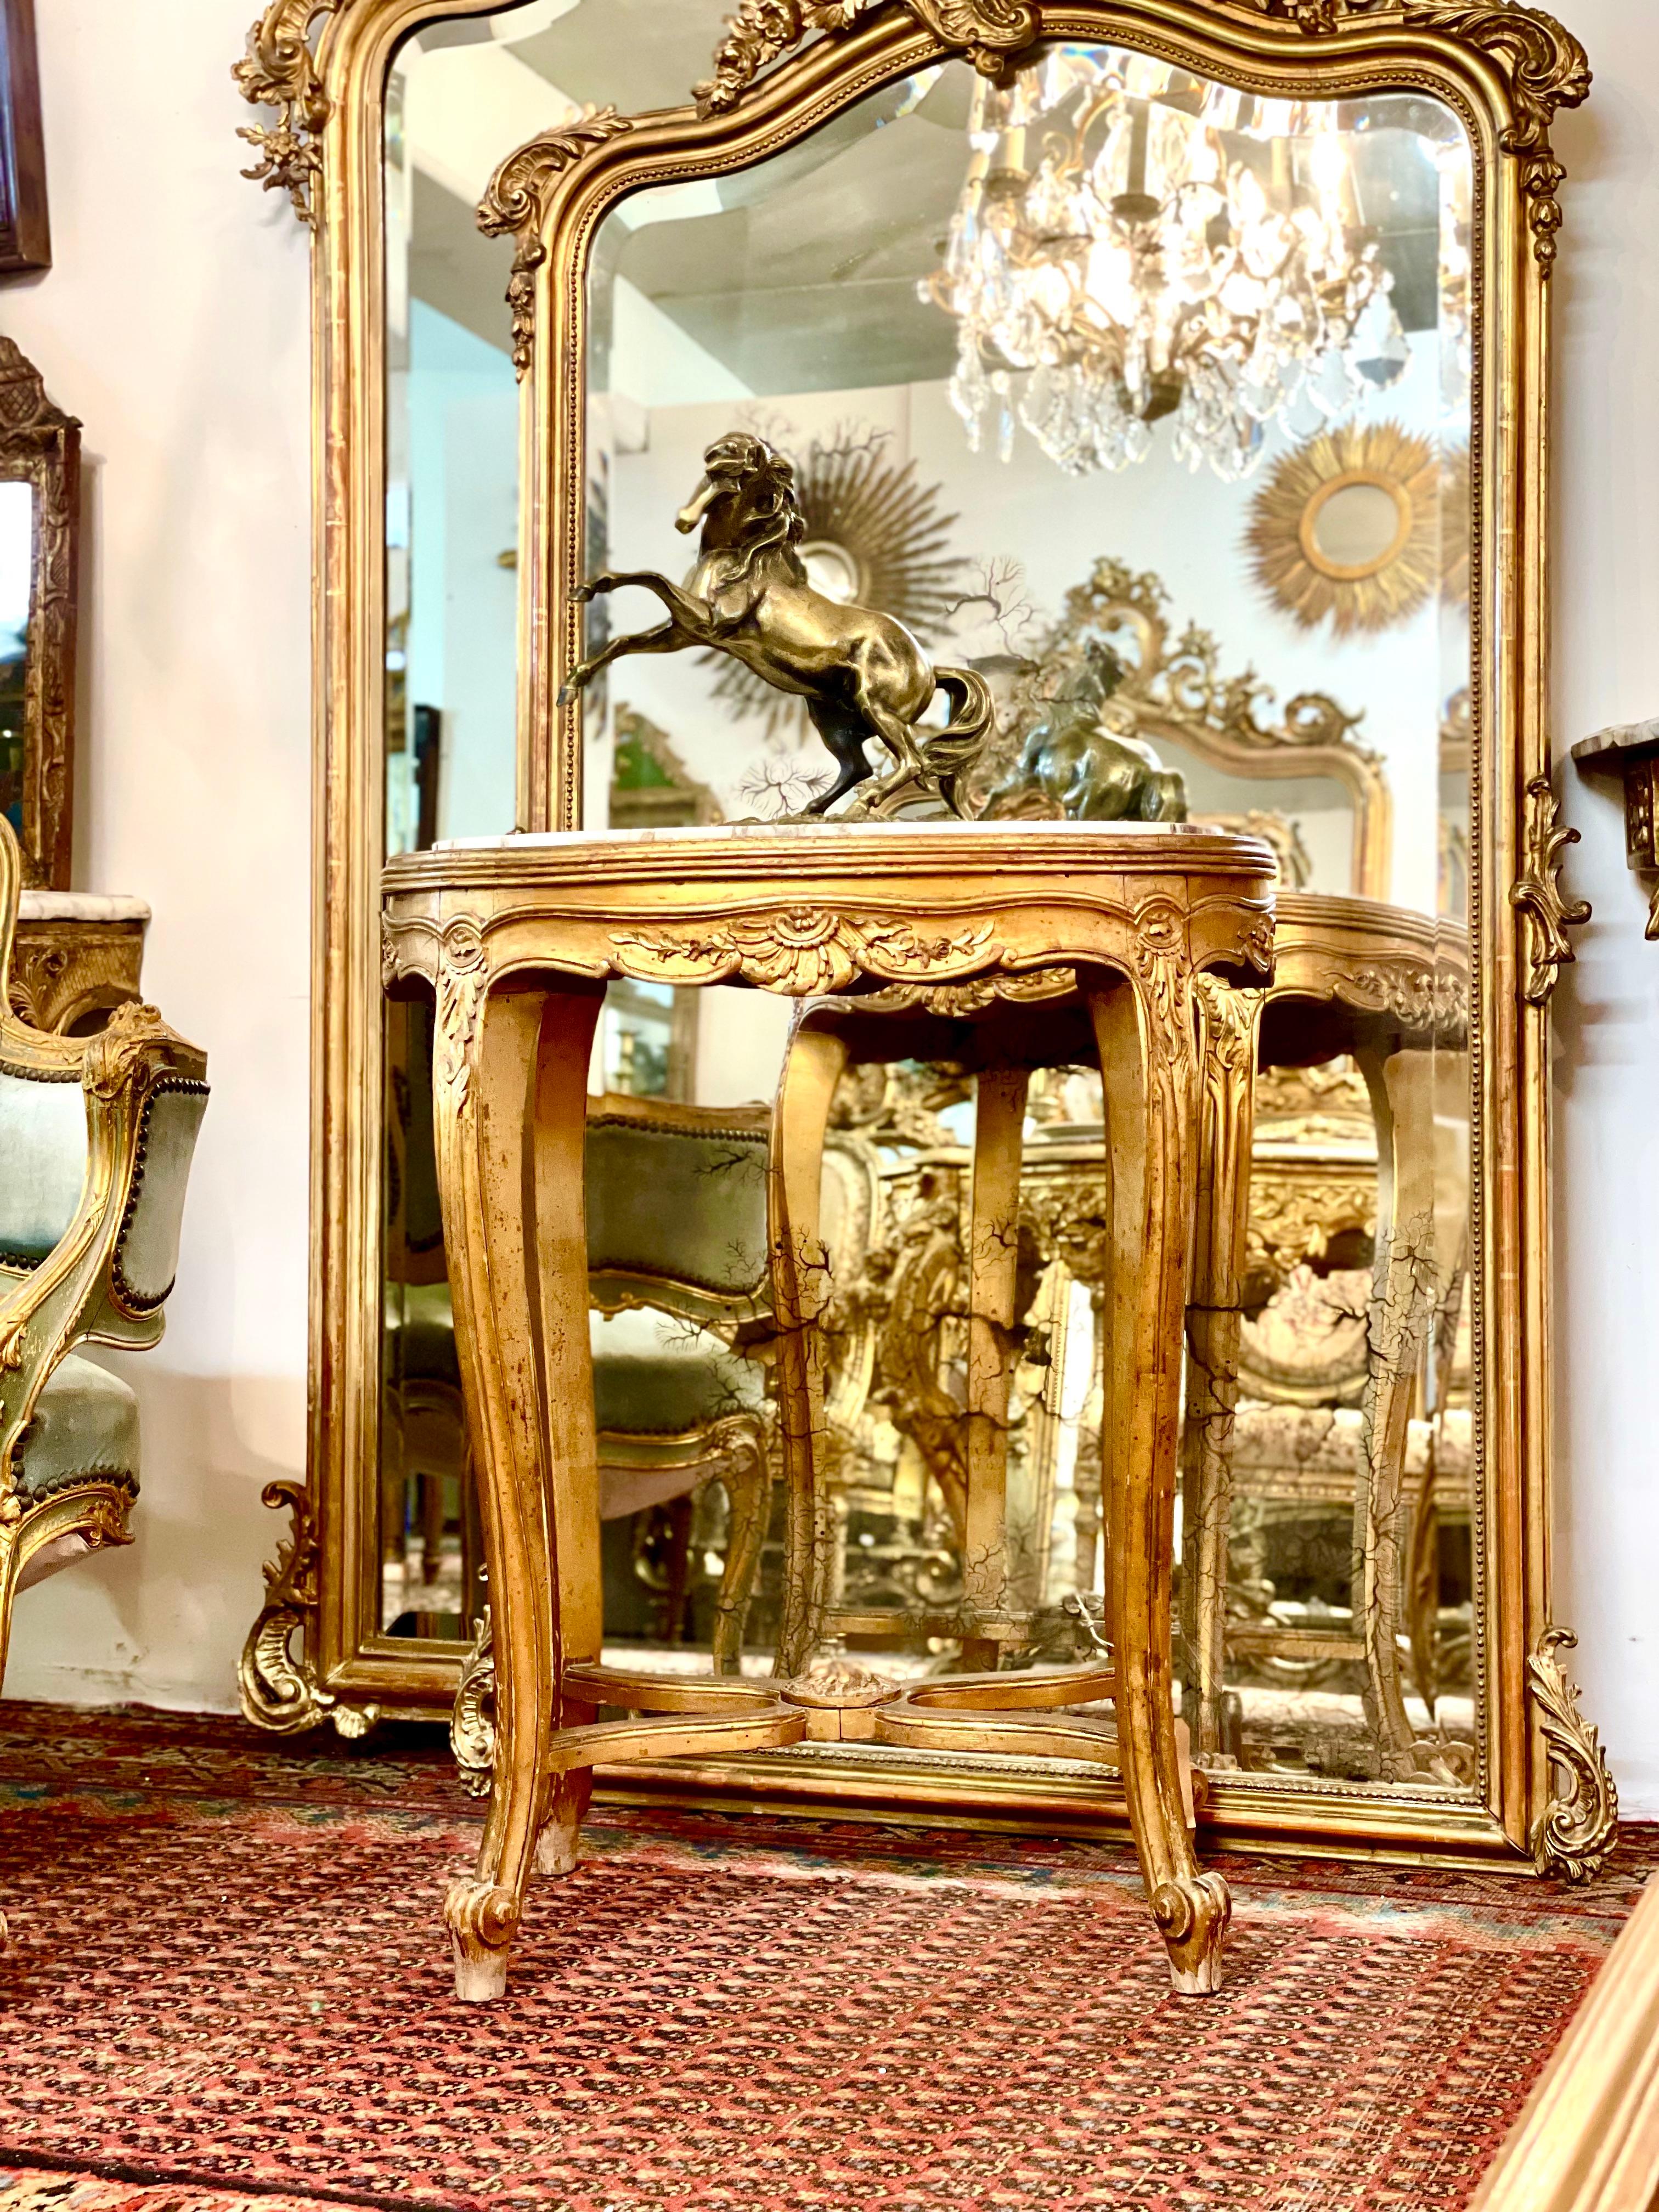 A very charming oval shaped Napoleon III period gilt wood center table with marble top. This ornate table stands on four shapely cabriole legs linked by an X-shaped spacer and ending in scrolled feet. The golden hue of the wood is aged to a